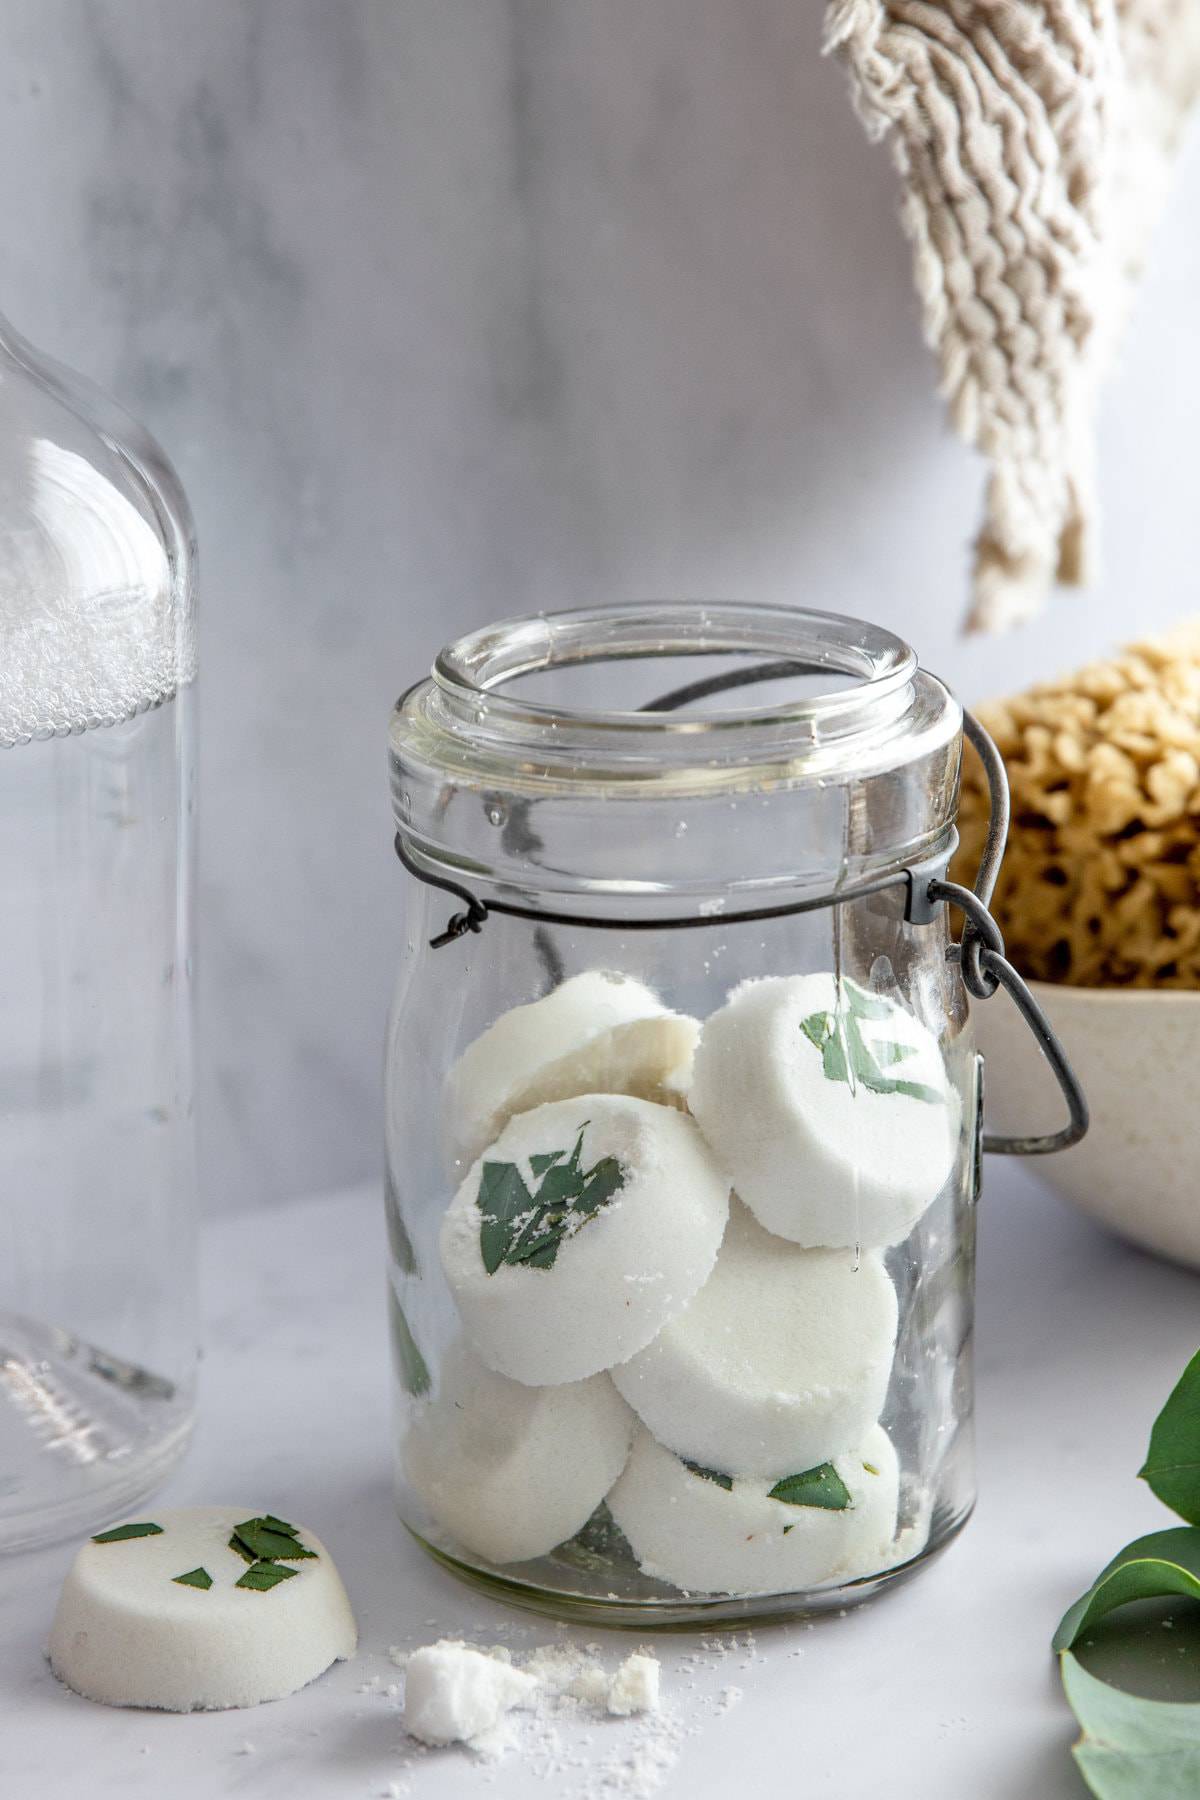 Eucalyptus Shower Steamers and Bath Bombs for congestion